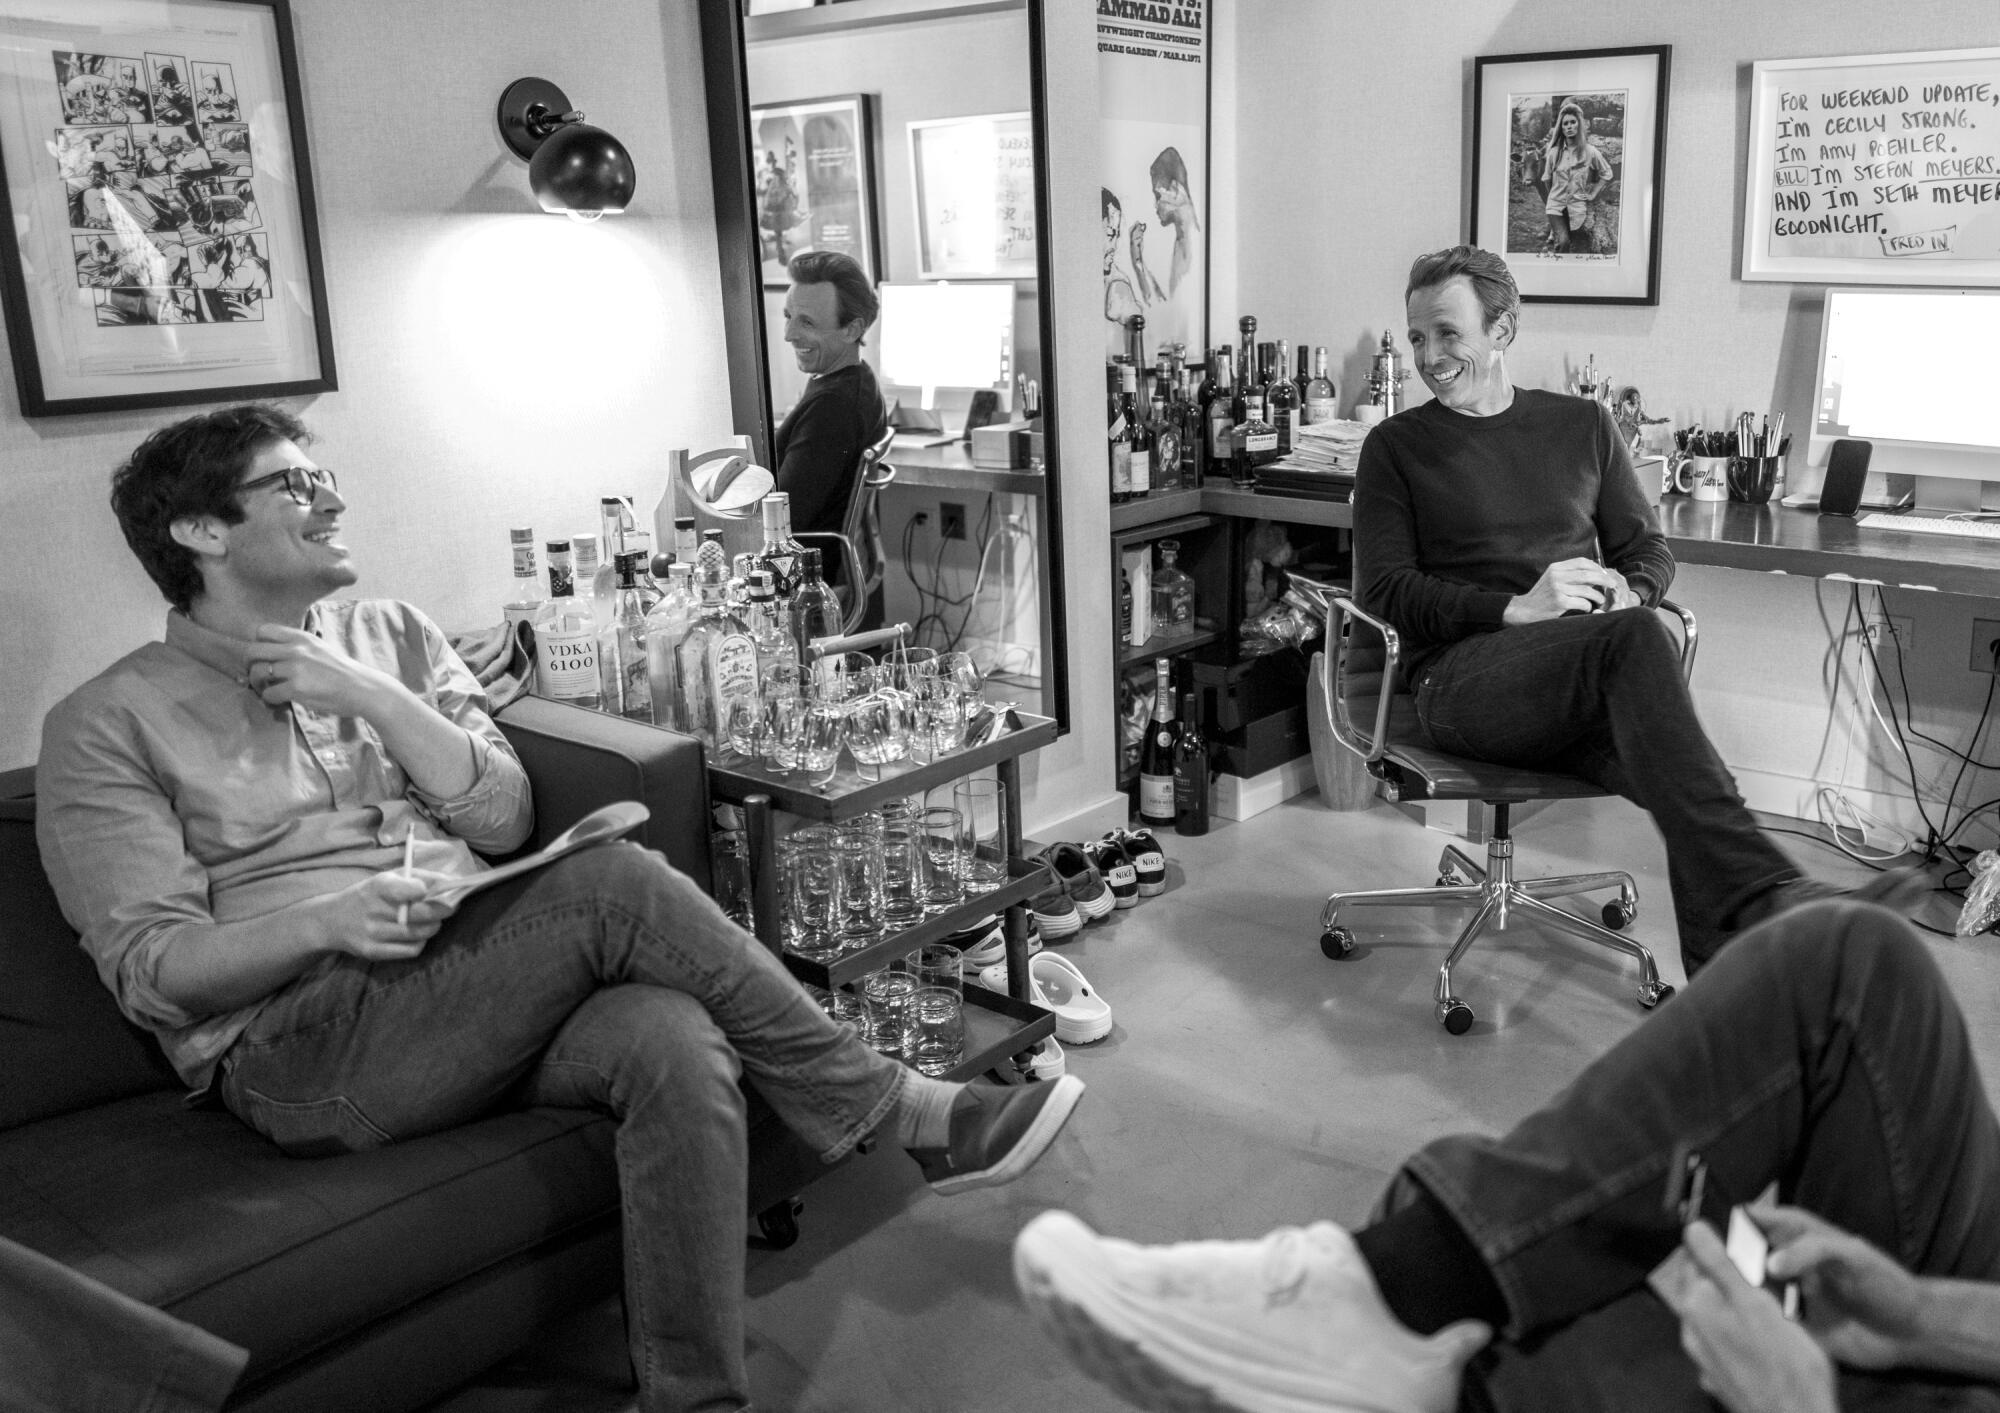 Sal Gentile, left, sits on a couch and looks at Seth Meyers, who is in a swivel chair.